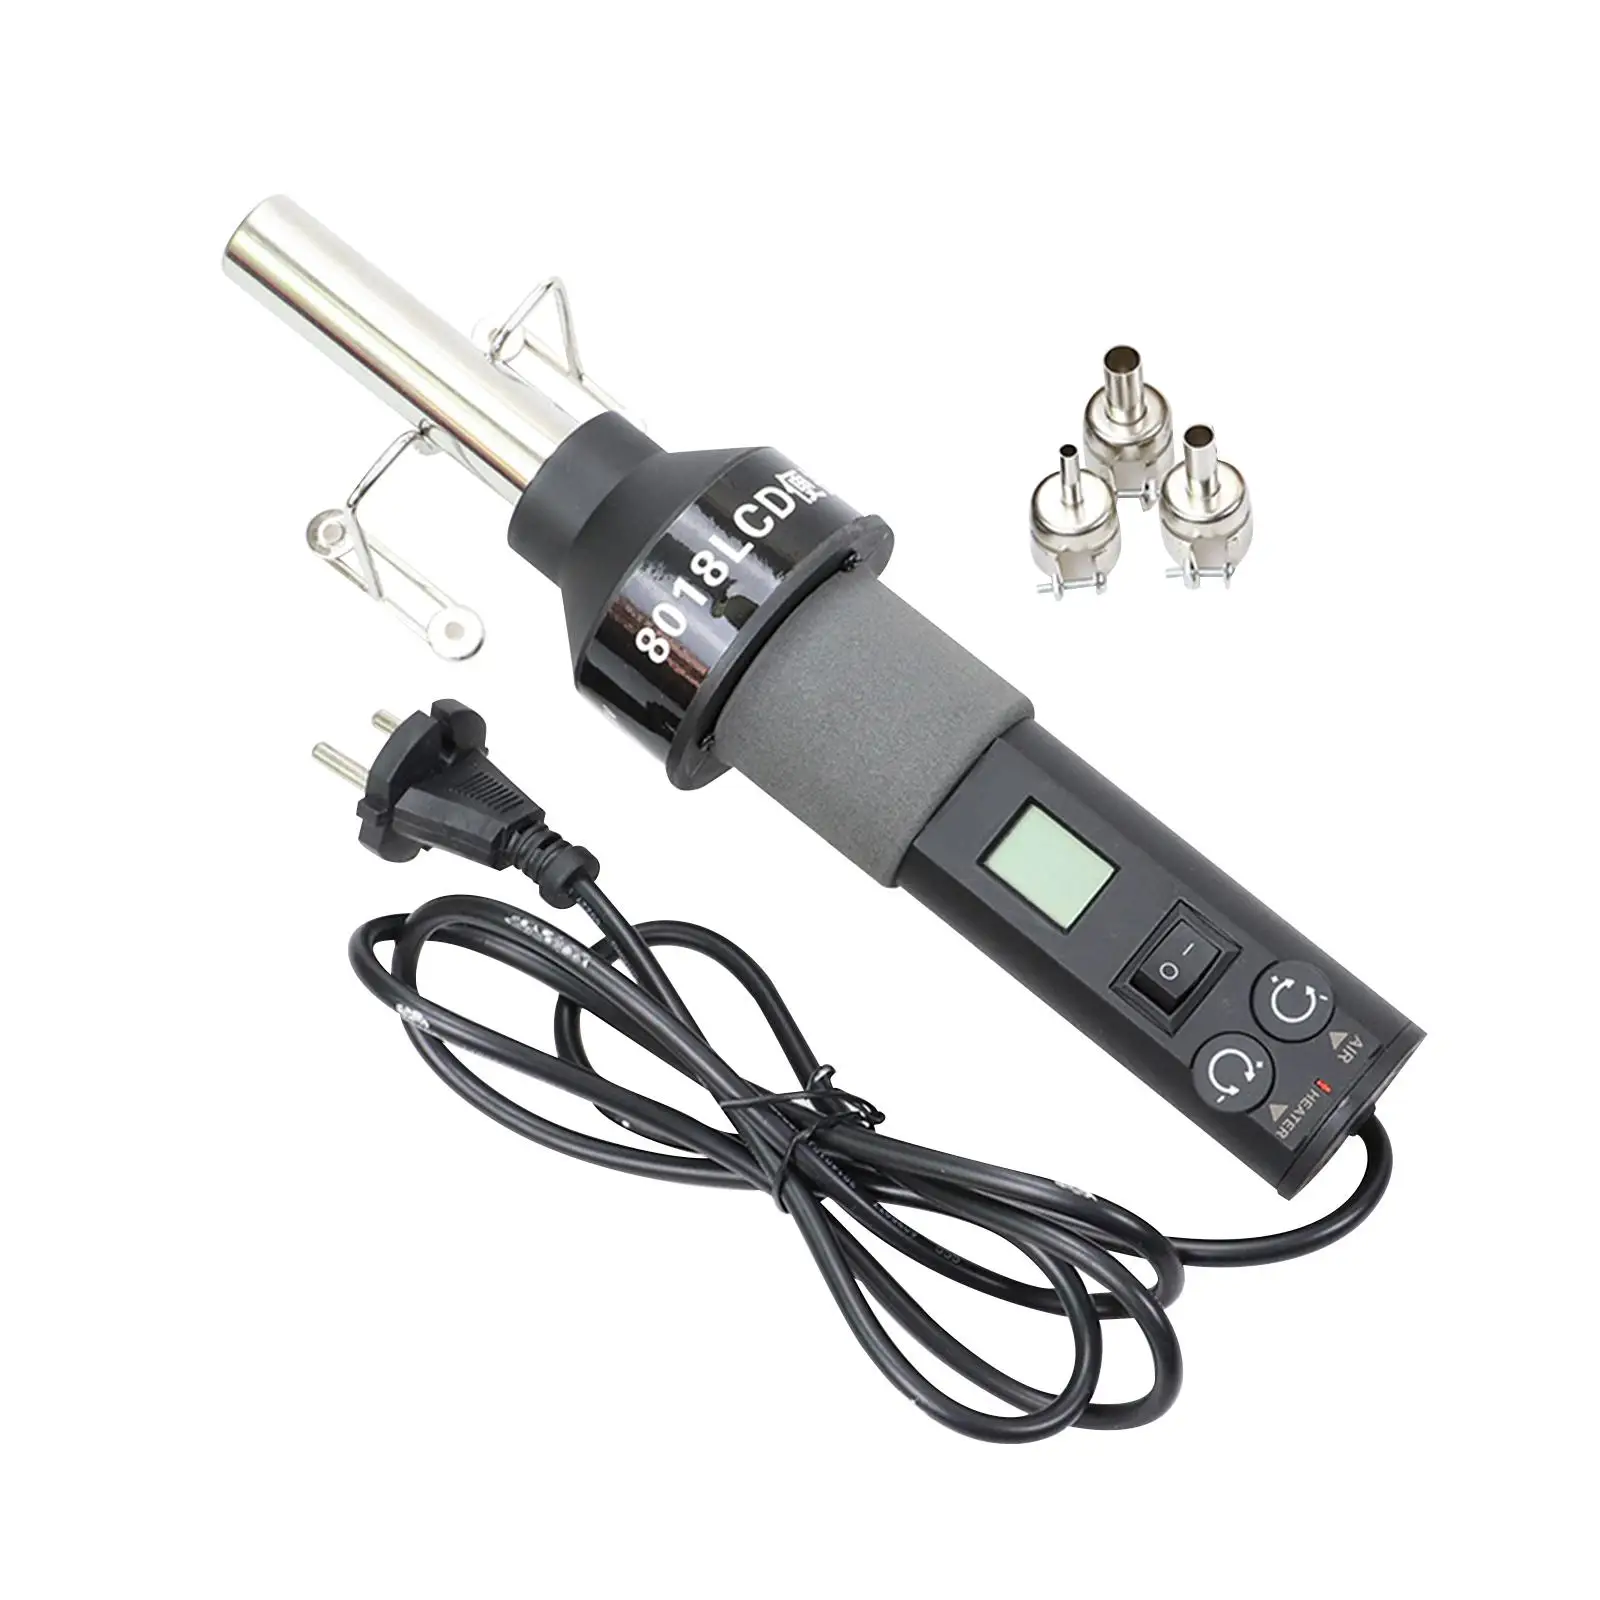 fast heating Handheld Hot air 110V for Crafts Embossing with LCD Display Temperature Adjustable Handheld Heat Tools for Crafts